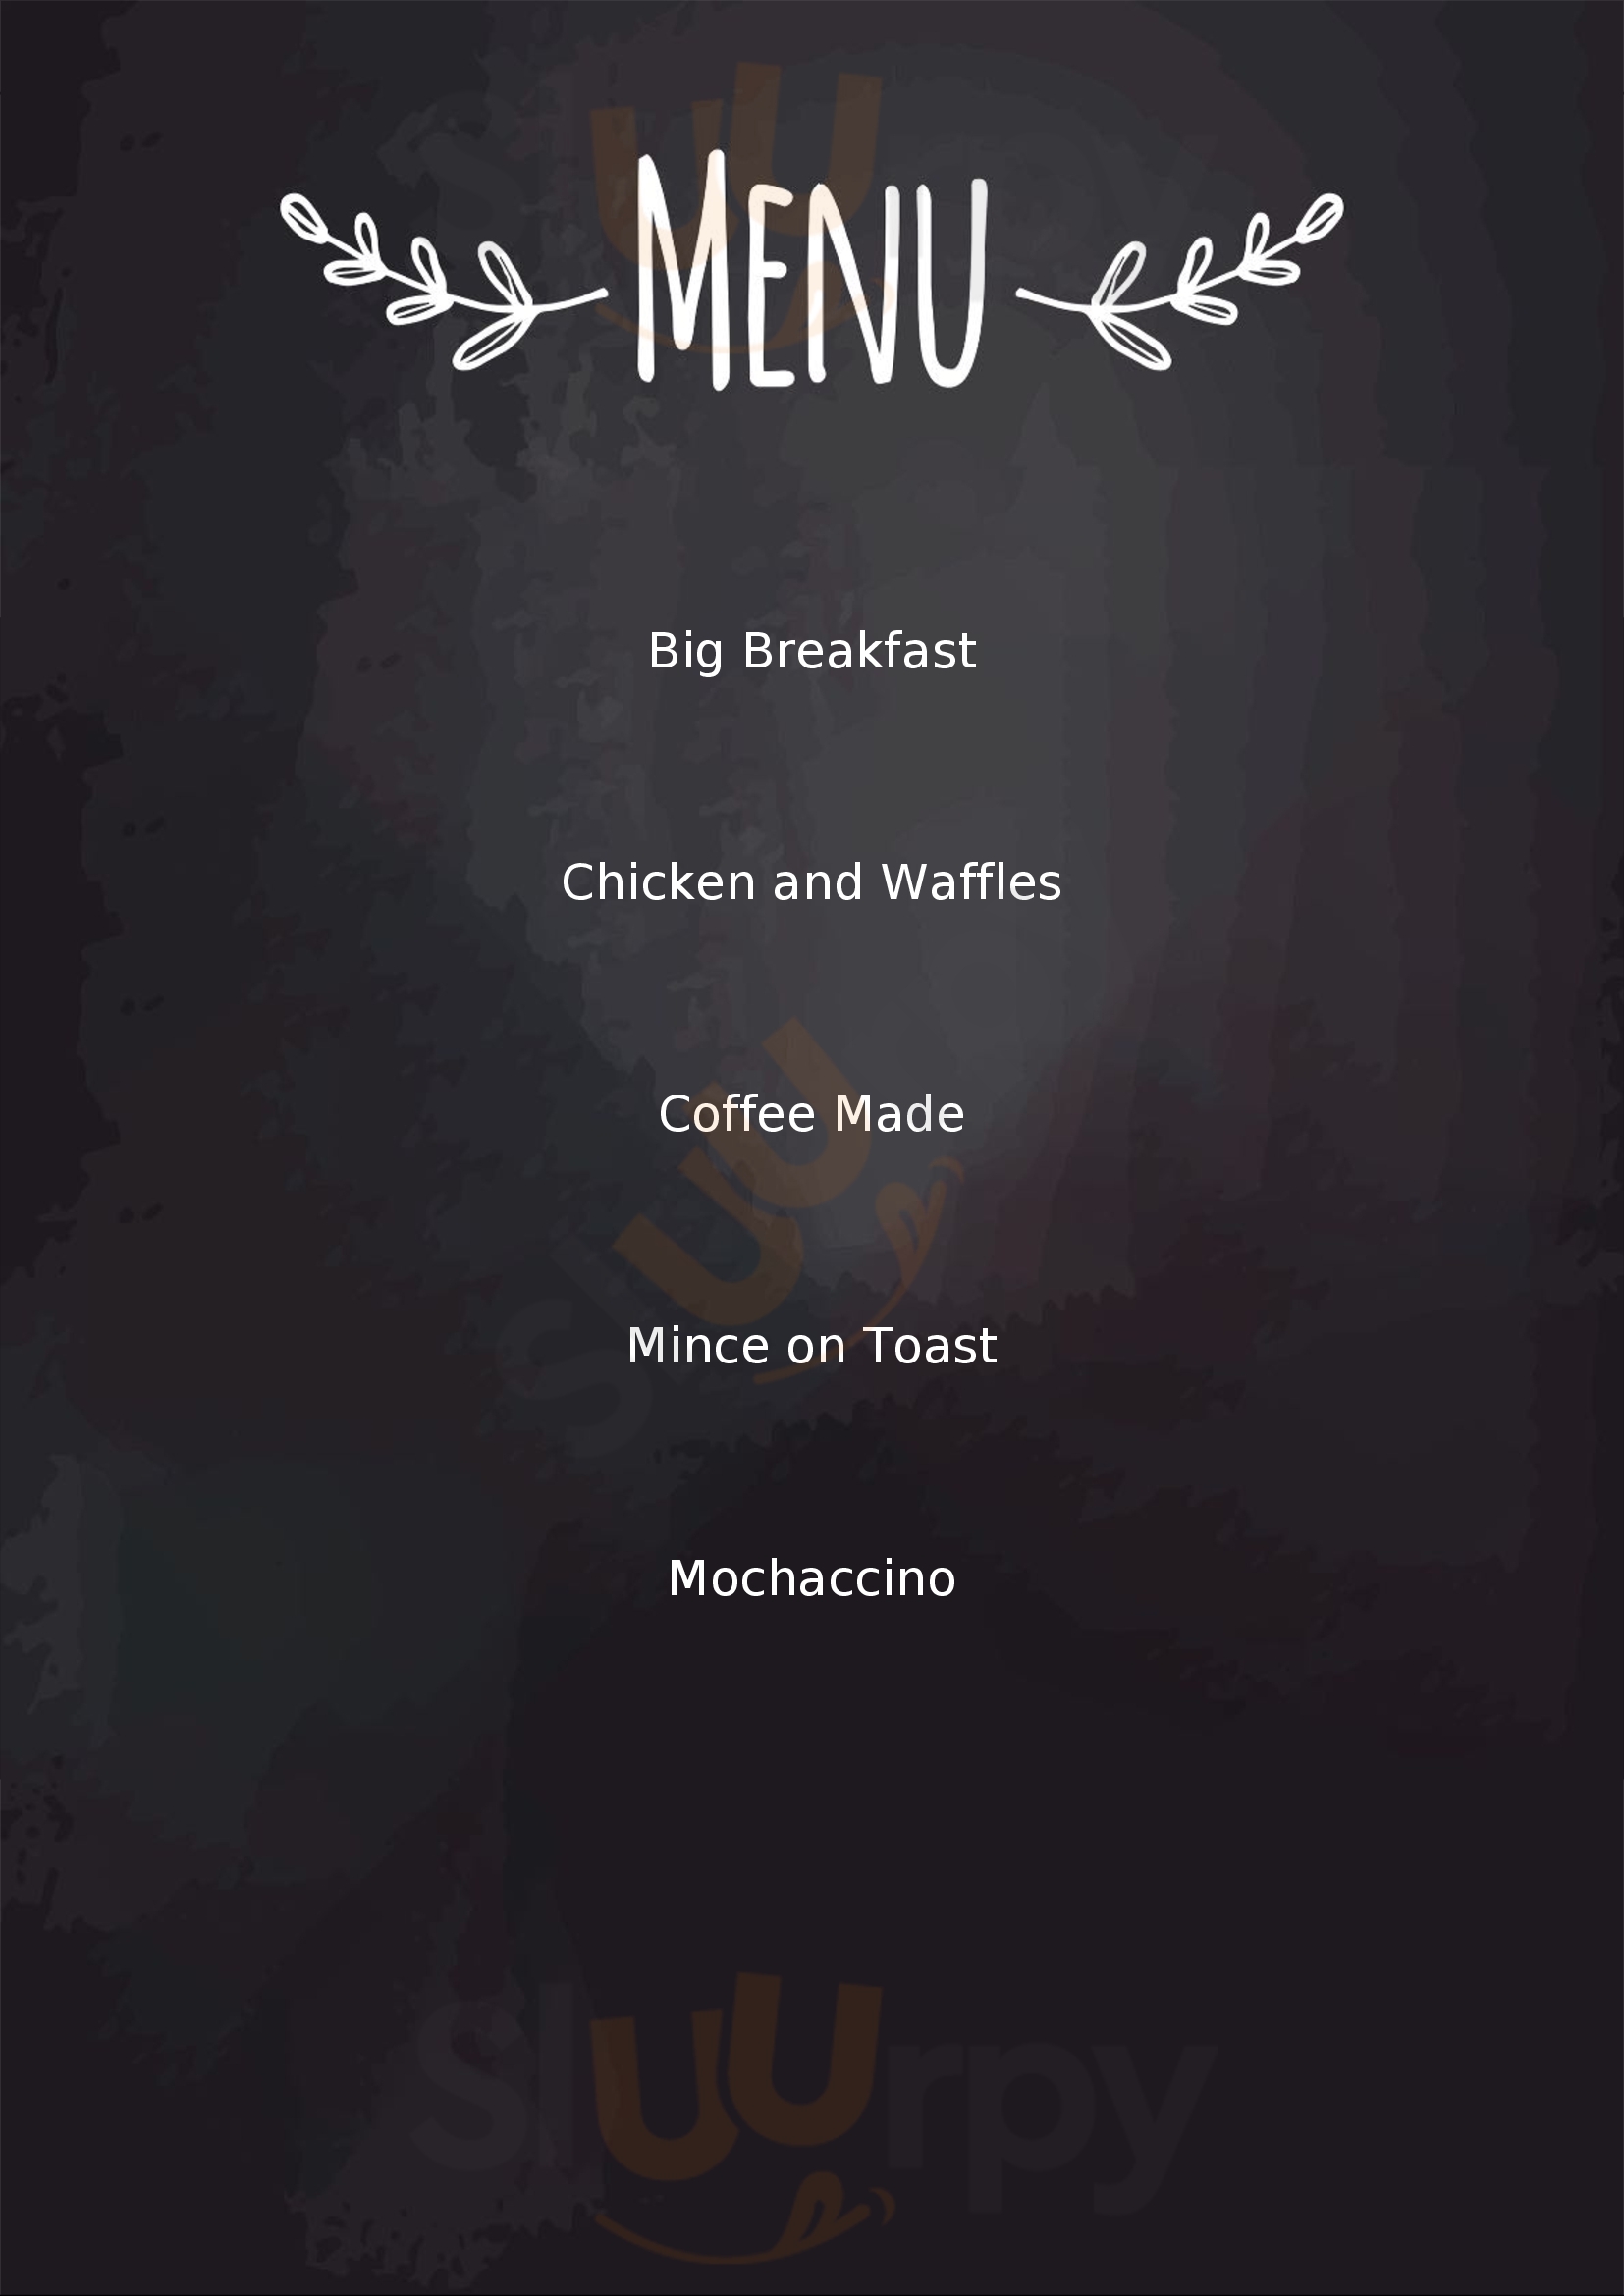 Elixir West Cafe & Catering New Plymouth Menu - 1